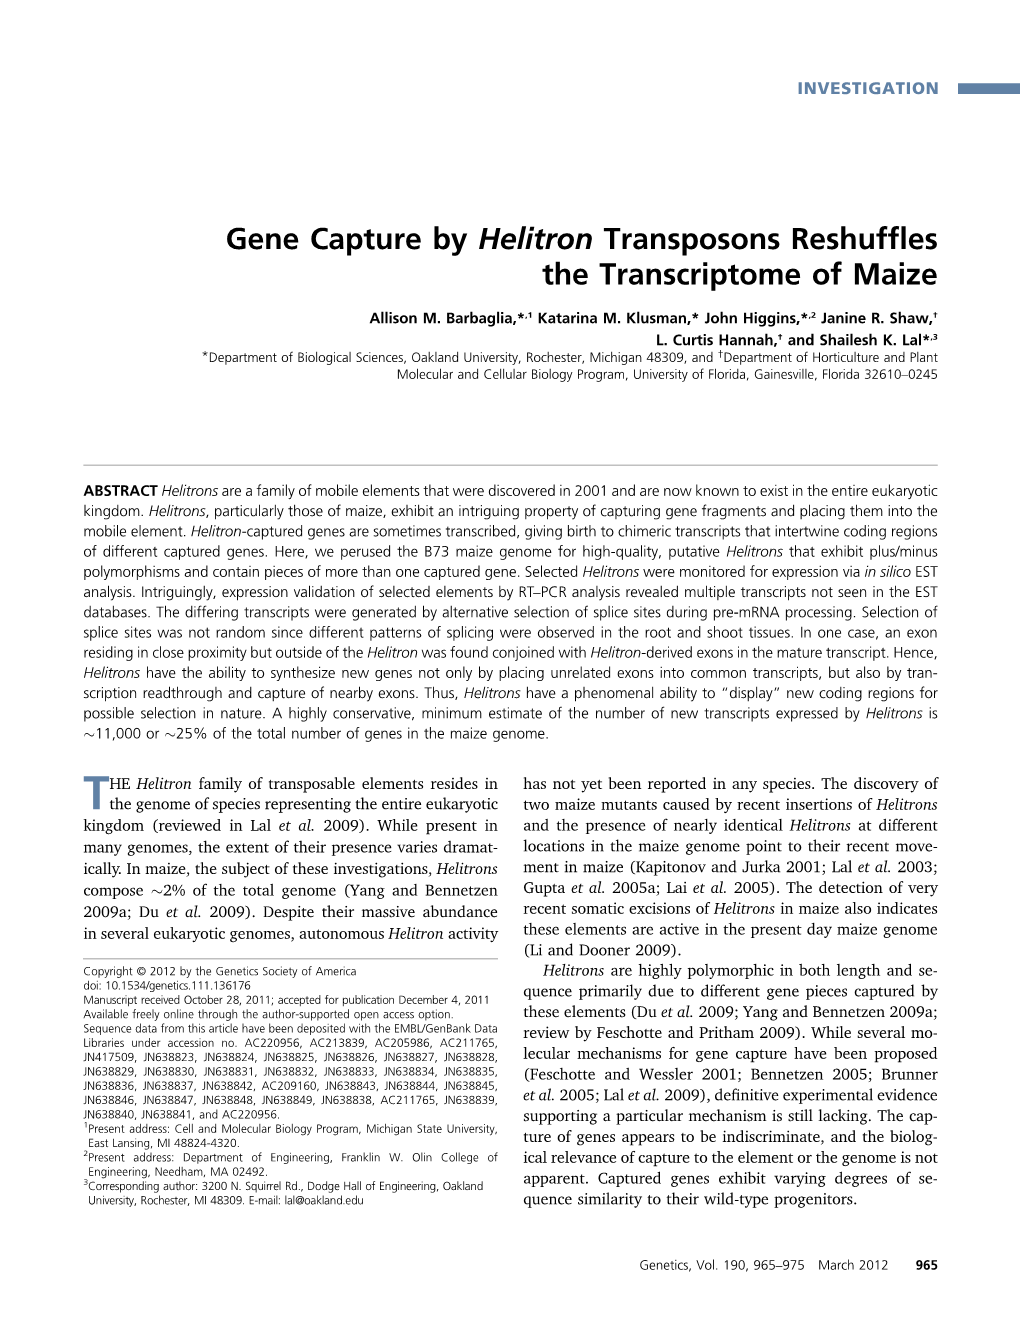 Gene Capture by Helitron Transposons Reshuffles The